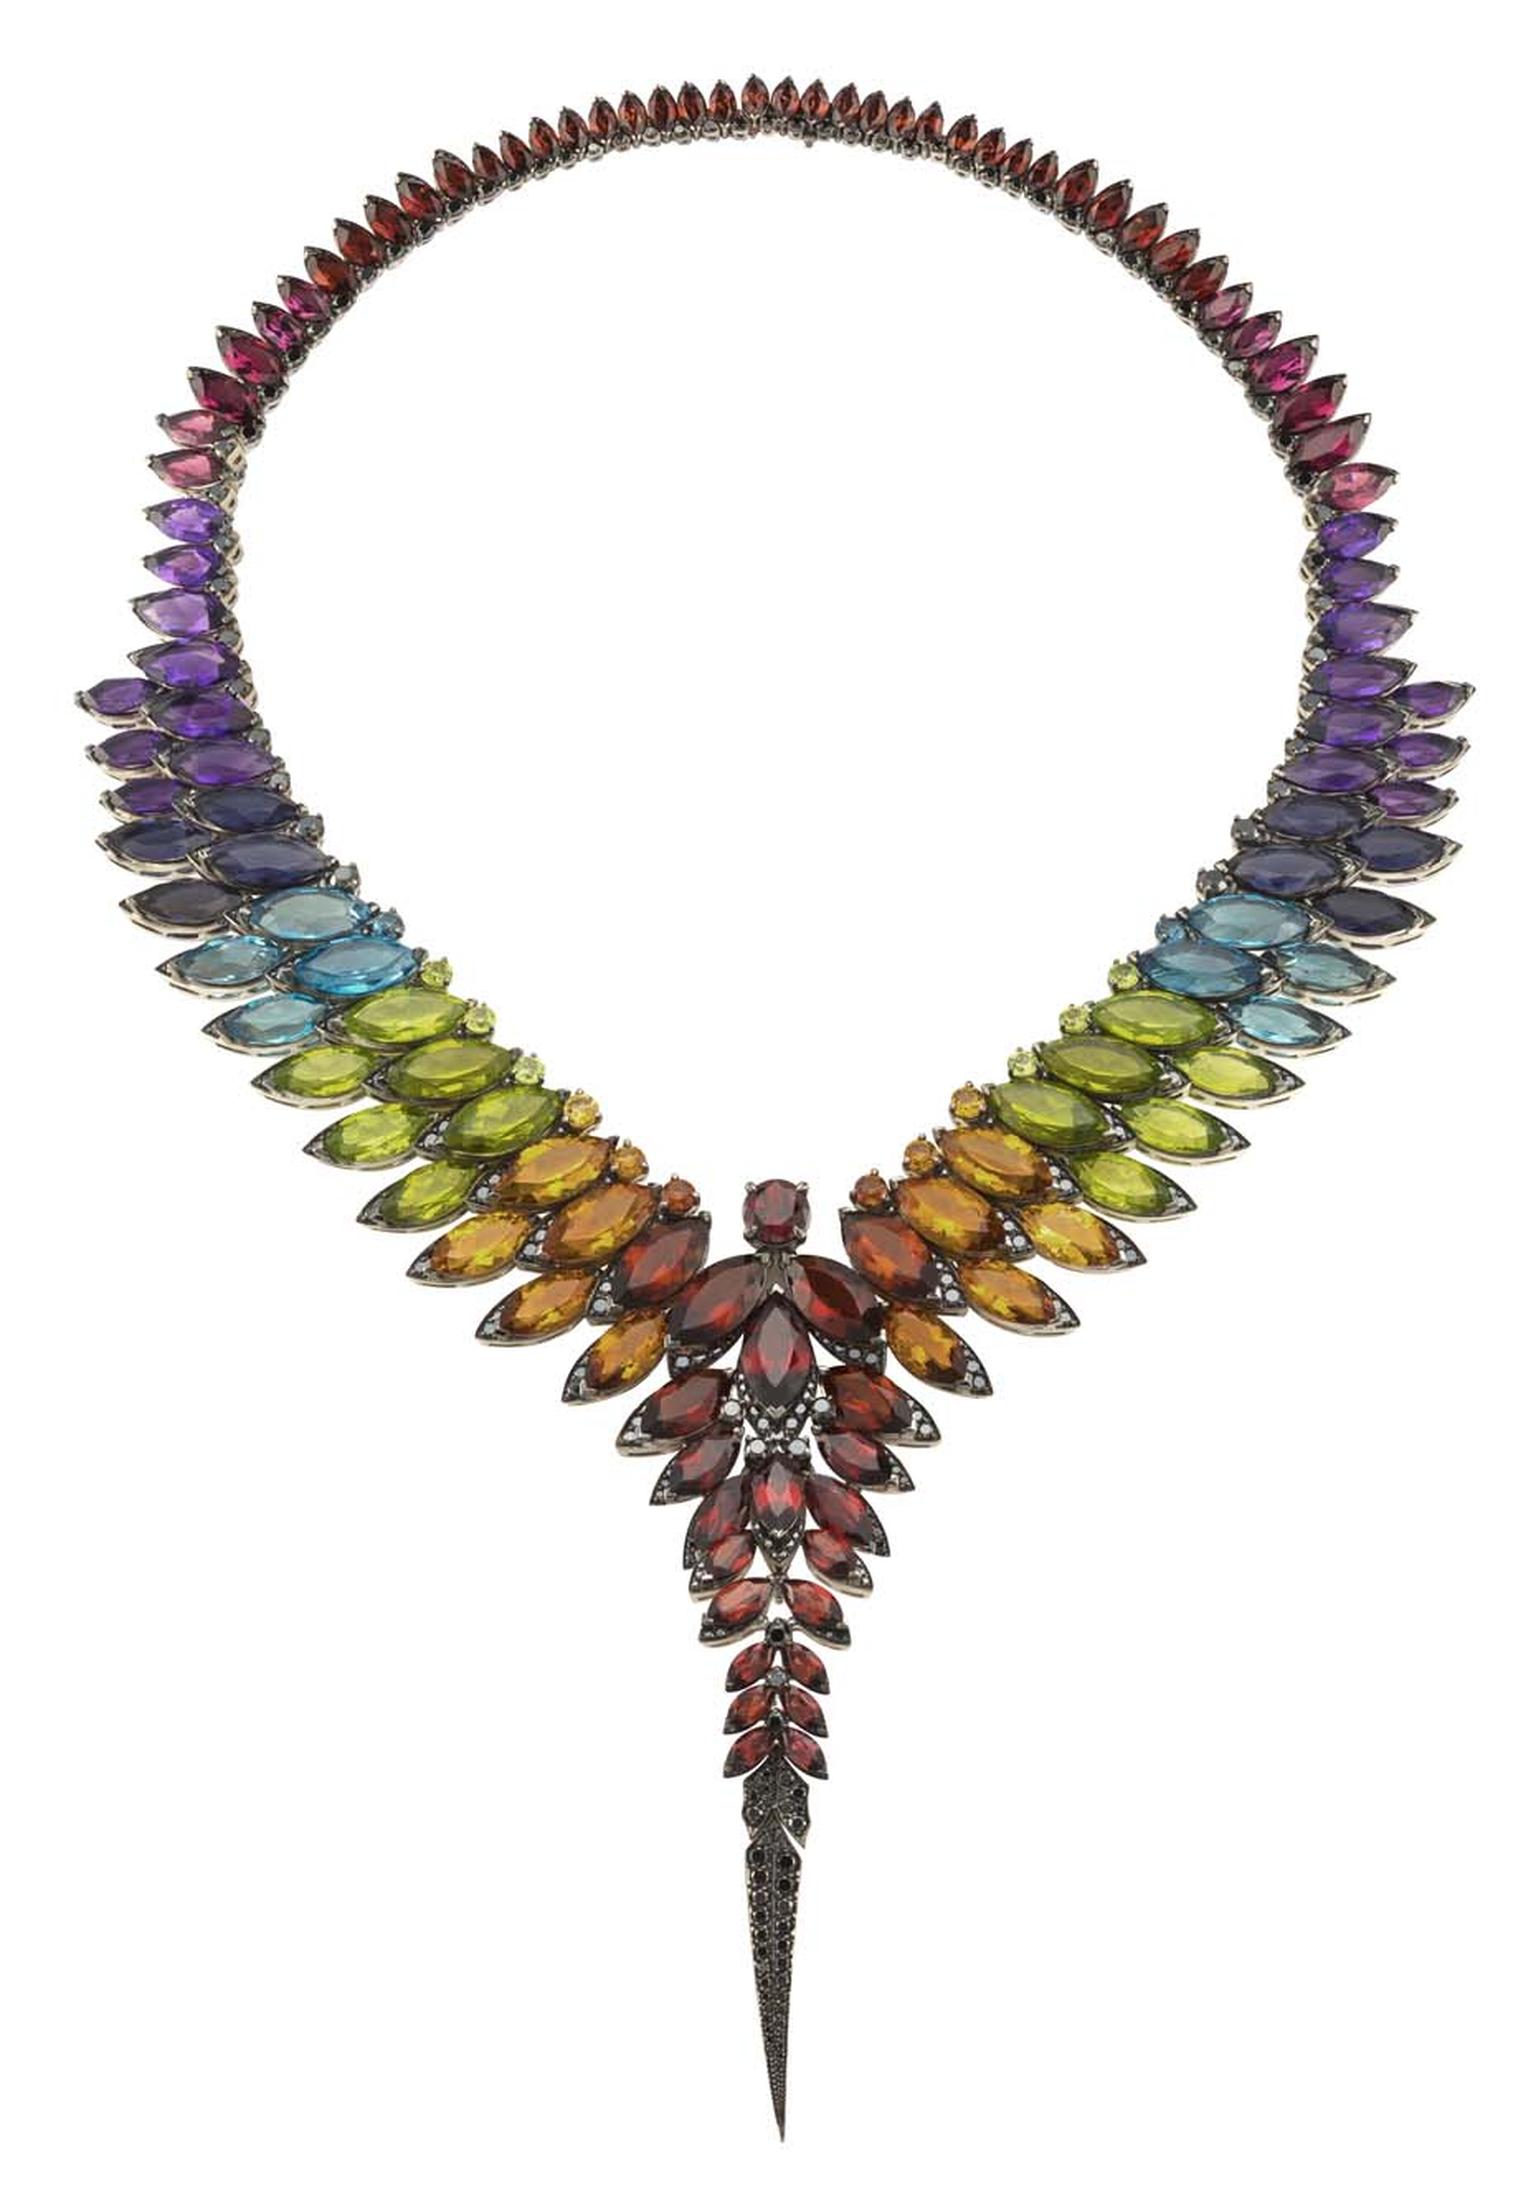 Stephen Webster Magnipheasant necklace with amethyst, pink tourmaline, red garnet, blue topaz, peridot and citrine